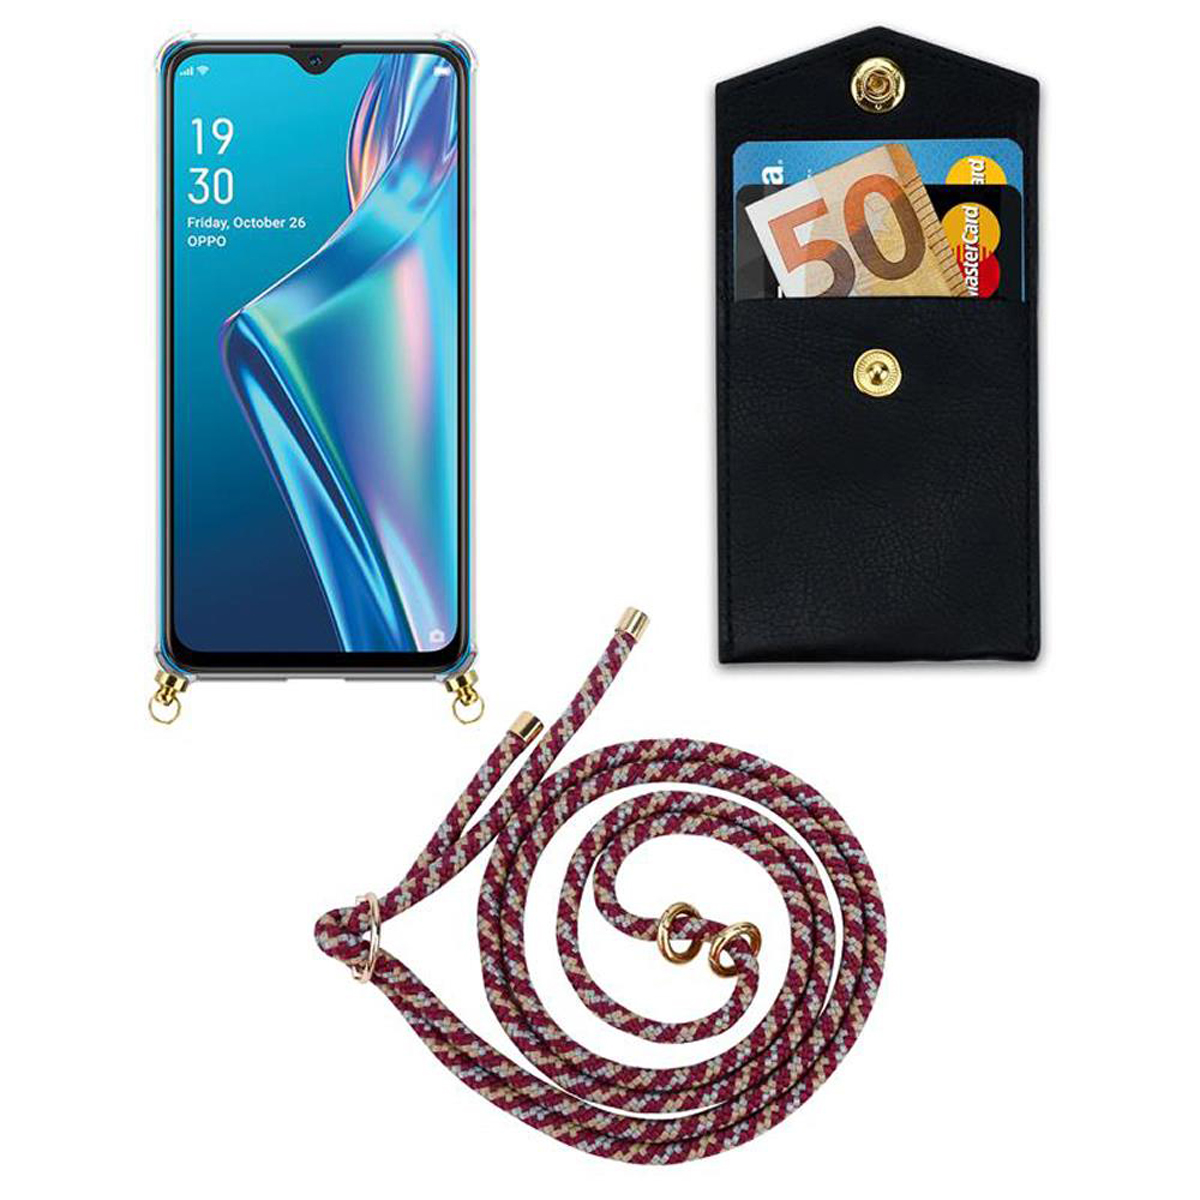 Handy mit CADORABO Backcover, und GELB Kette Band Hülle, Oppo, abnehmbarer WEIß Ringen, Kordel ROT A12, Gold